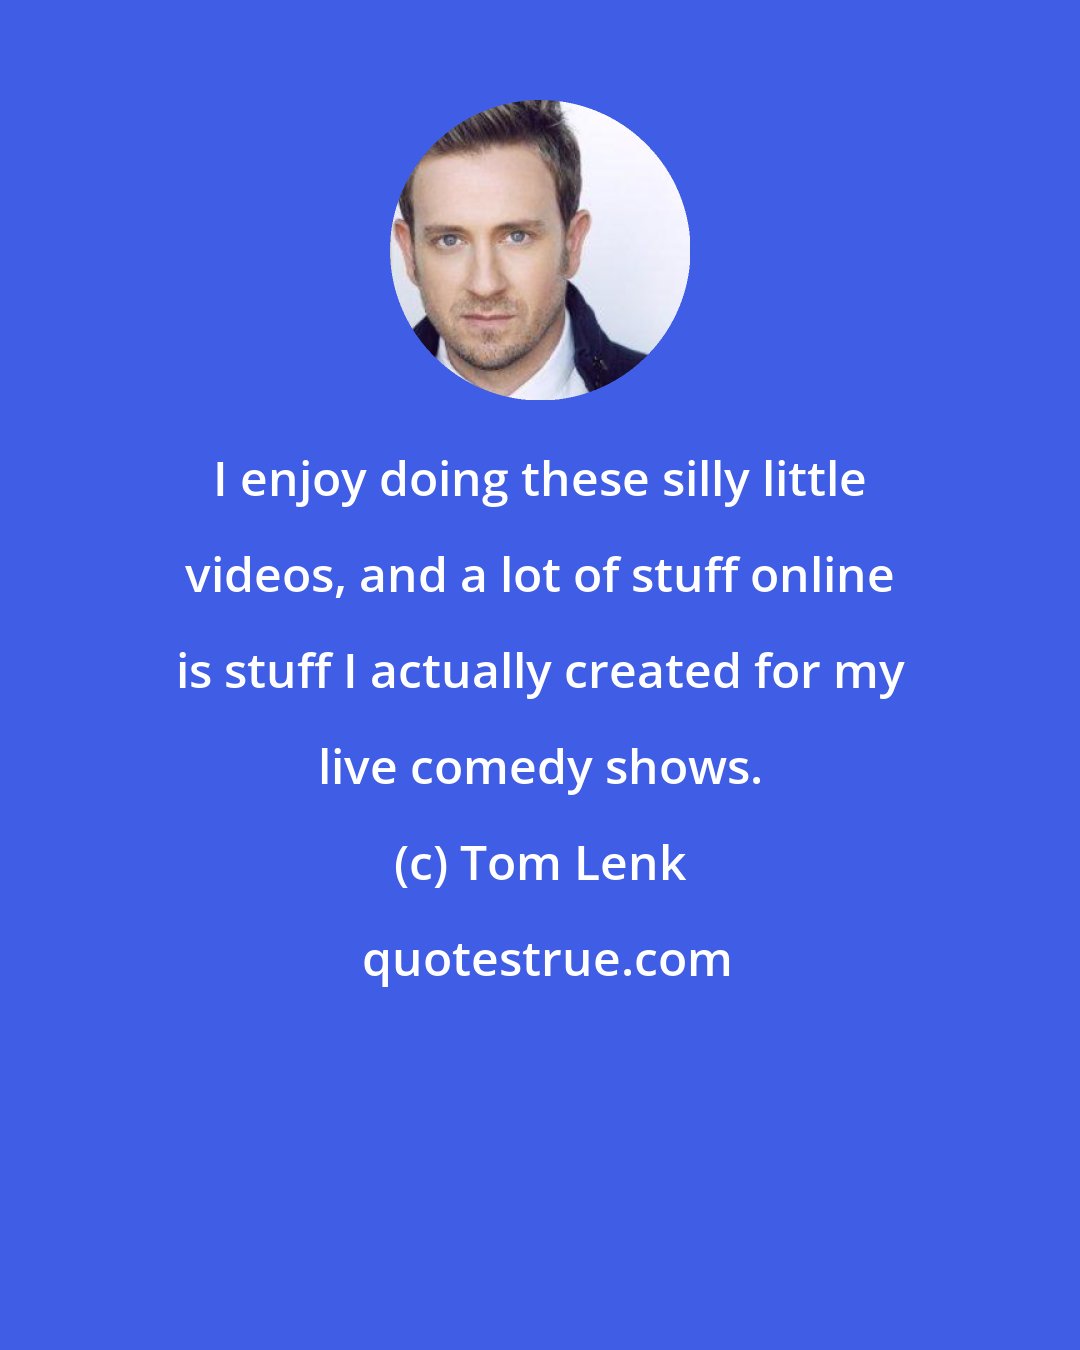 Tom Lenk: I enjoy doing these silly little videos, and a lot of stuff online is stuff I actually created for my live comedy shows.